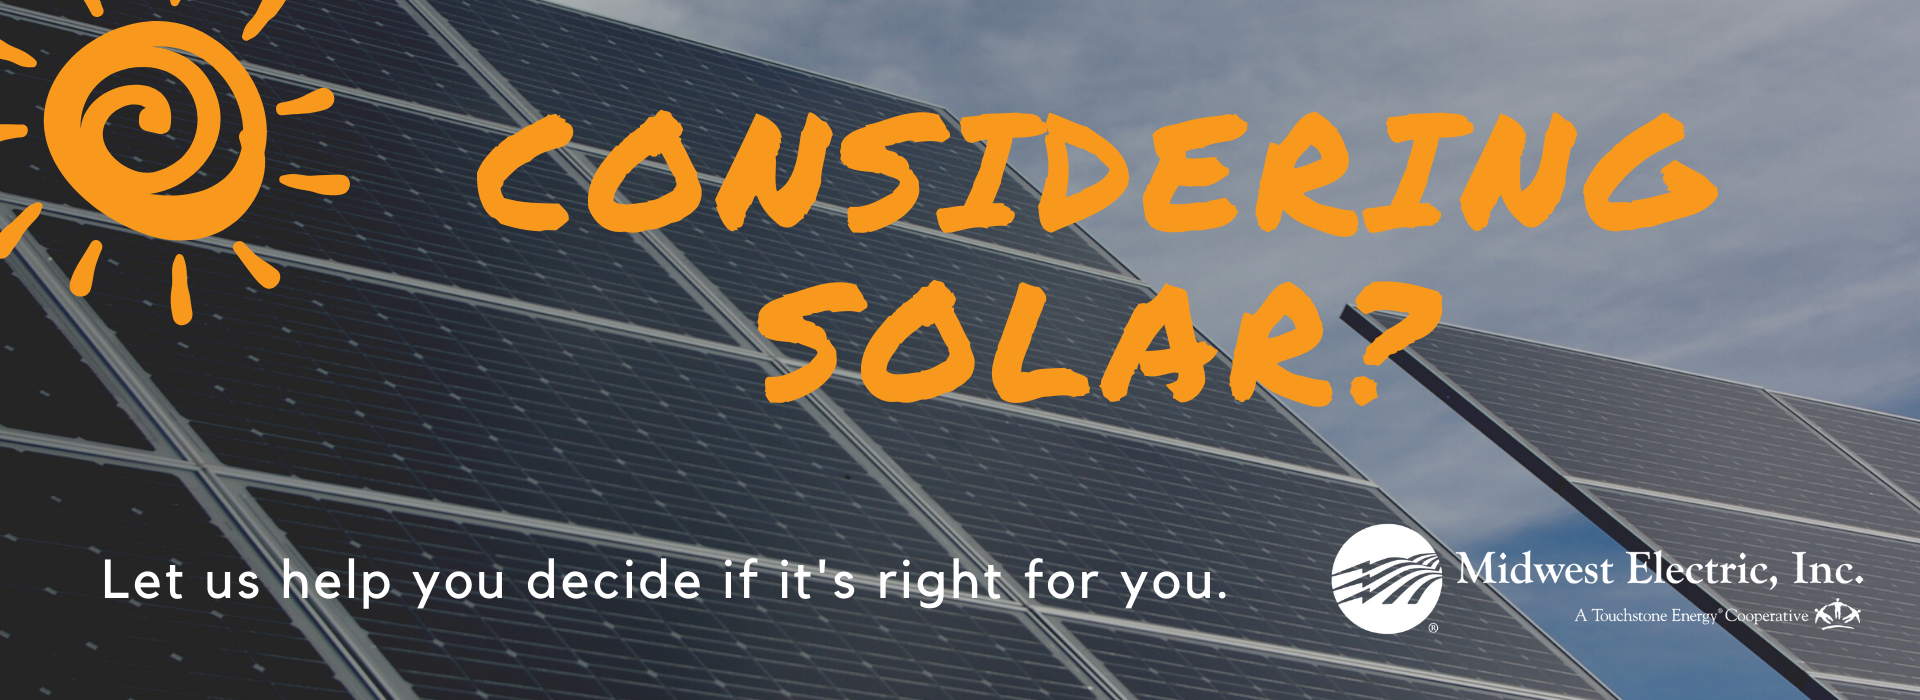 If you are considering solar, see our resources first to make sure it's the right choice for you